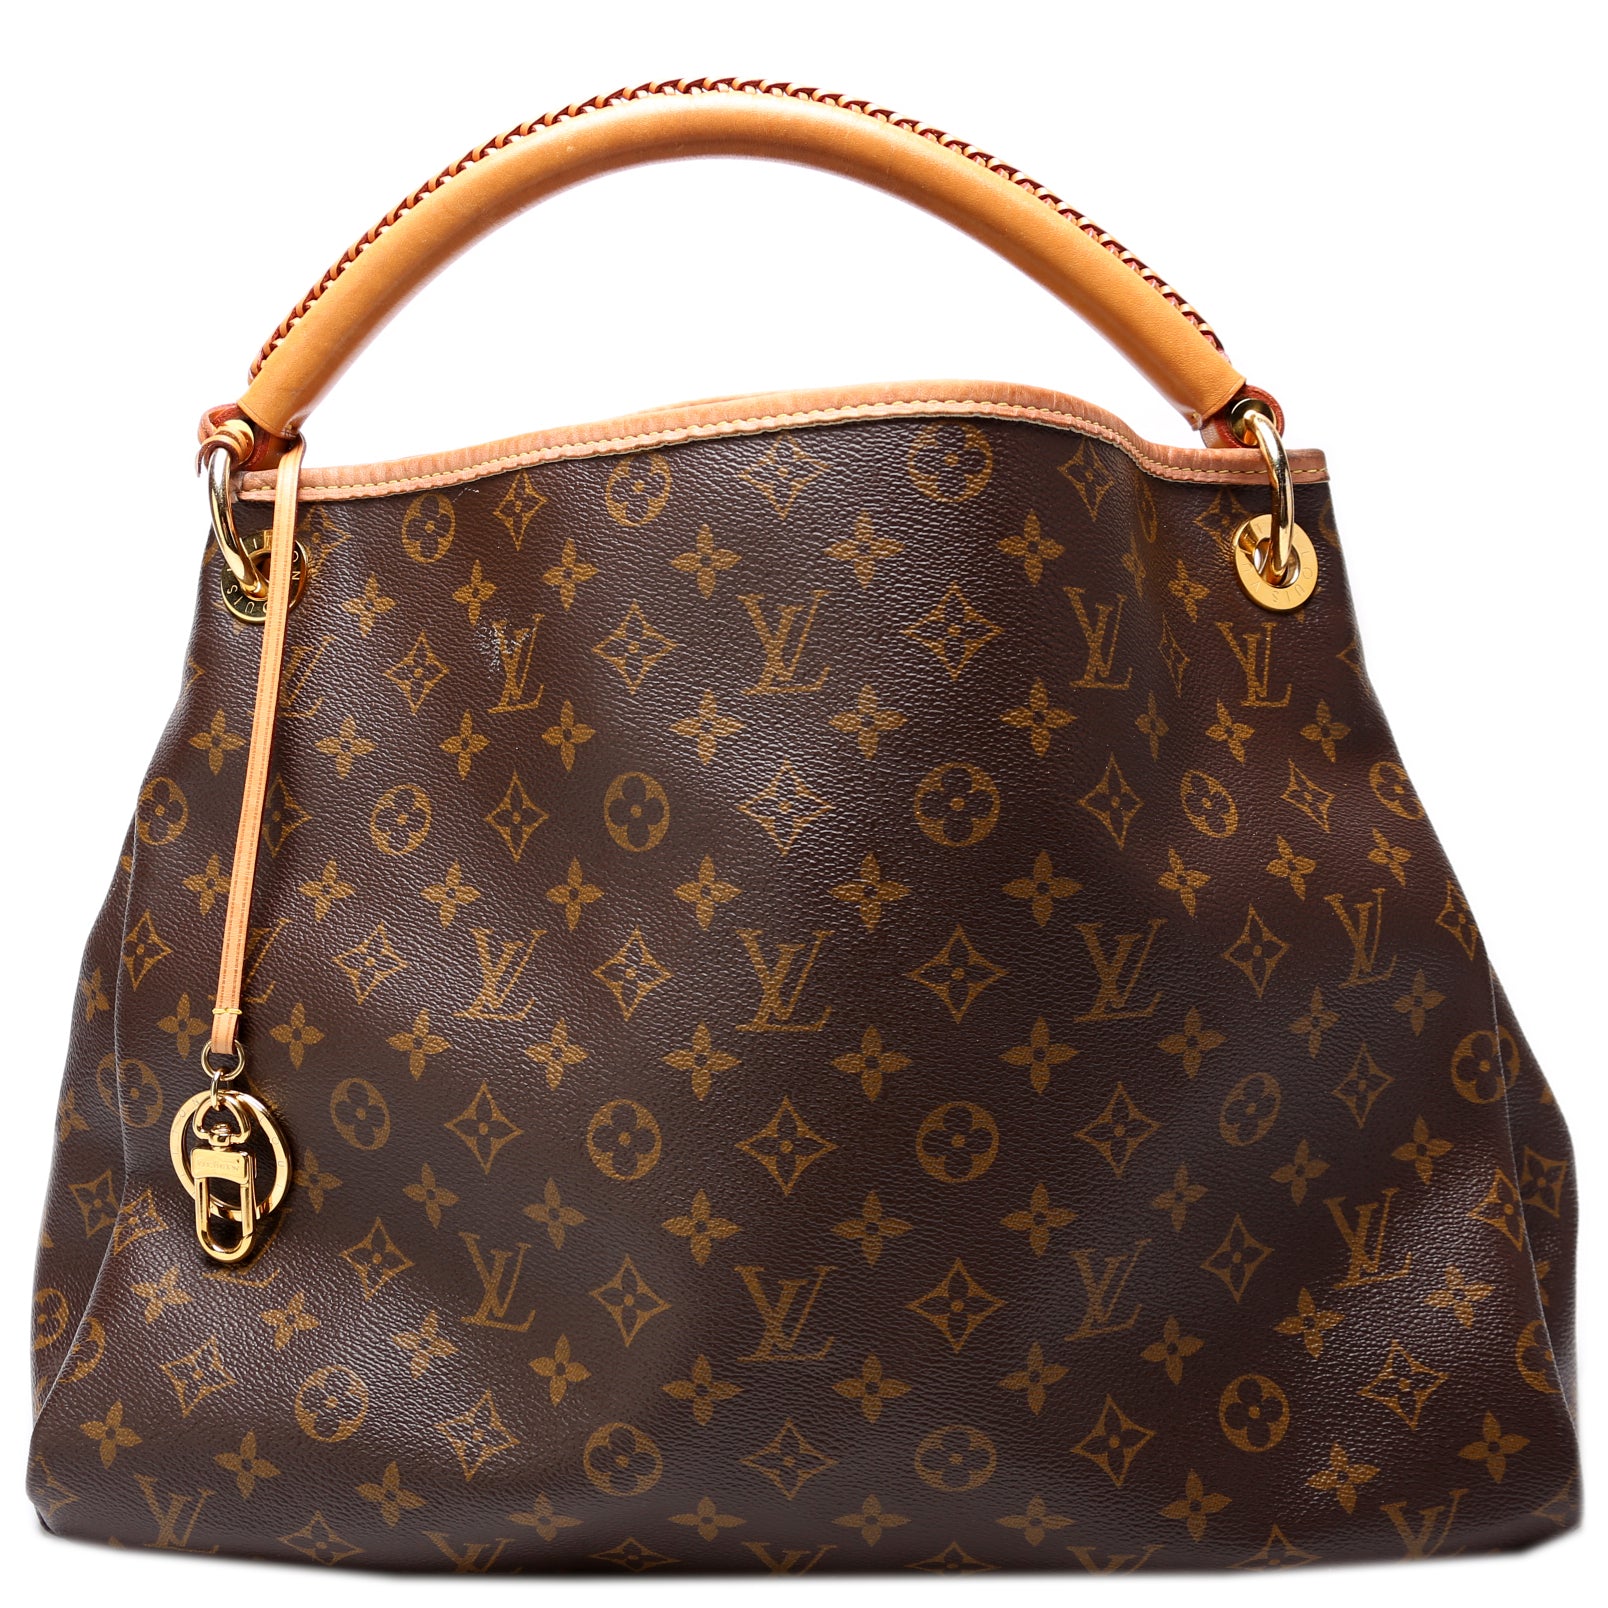 Louis Vuitton Artsy mm, Brown, One Size